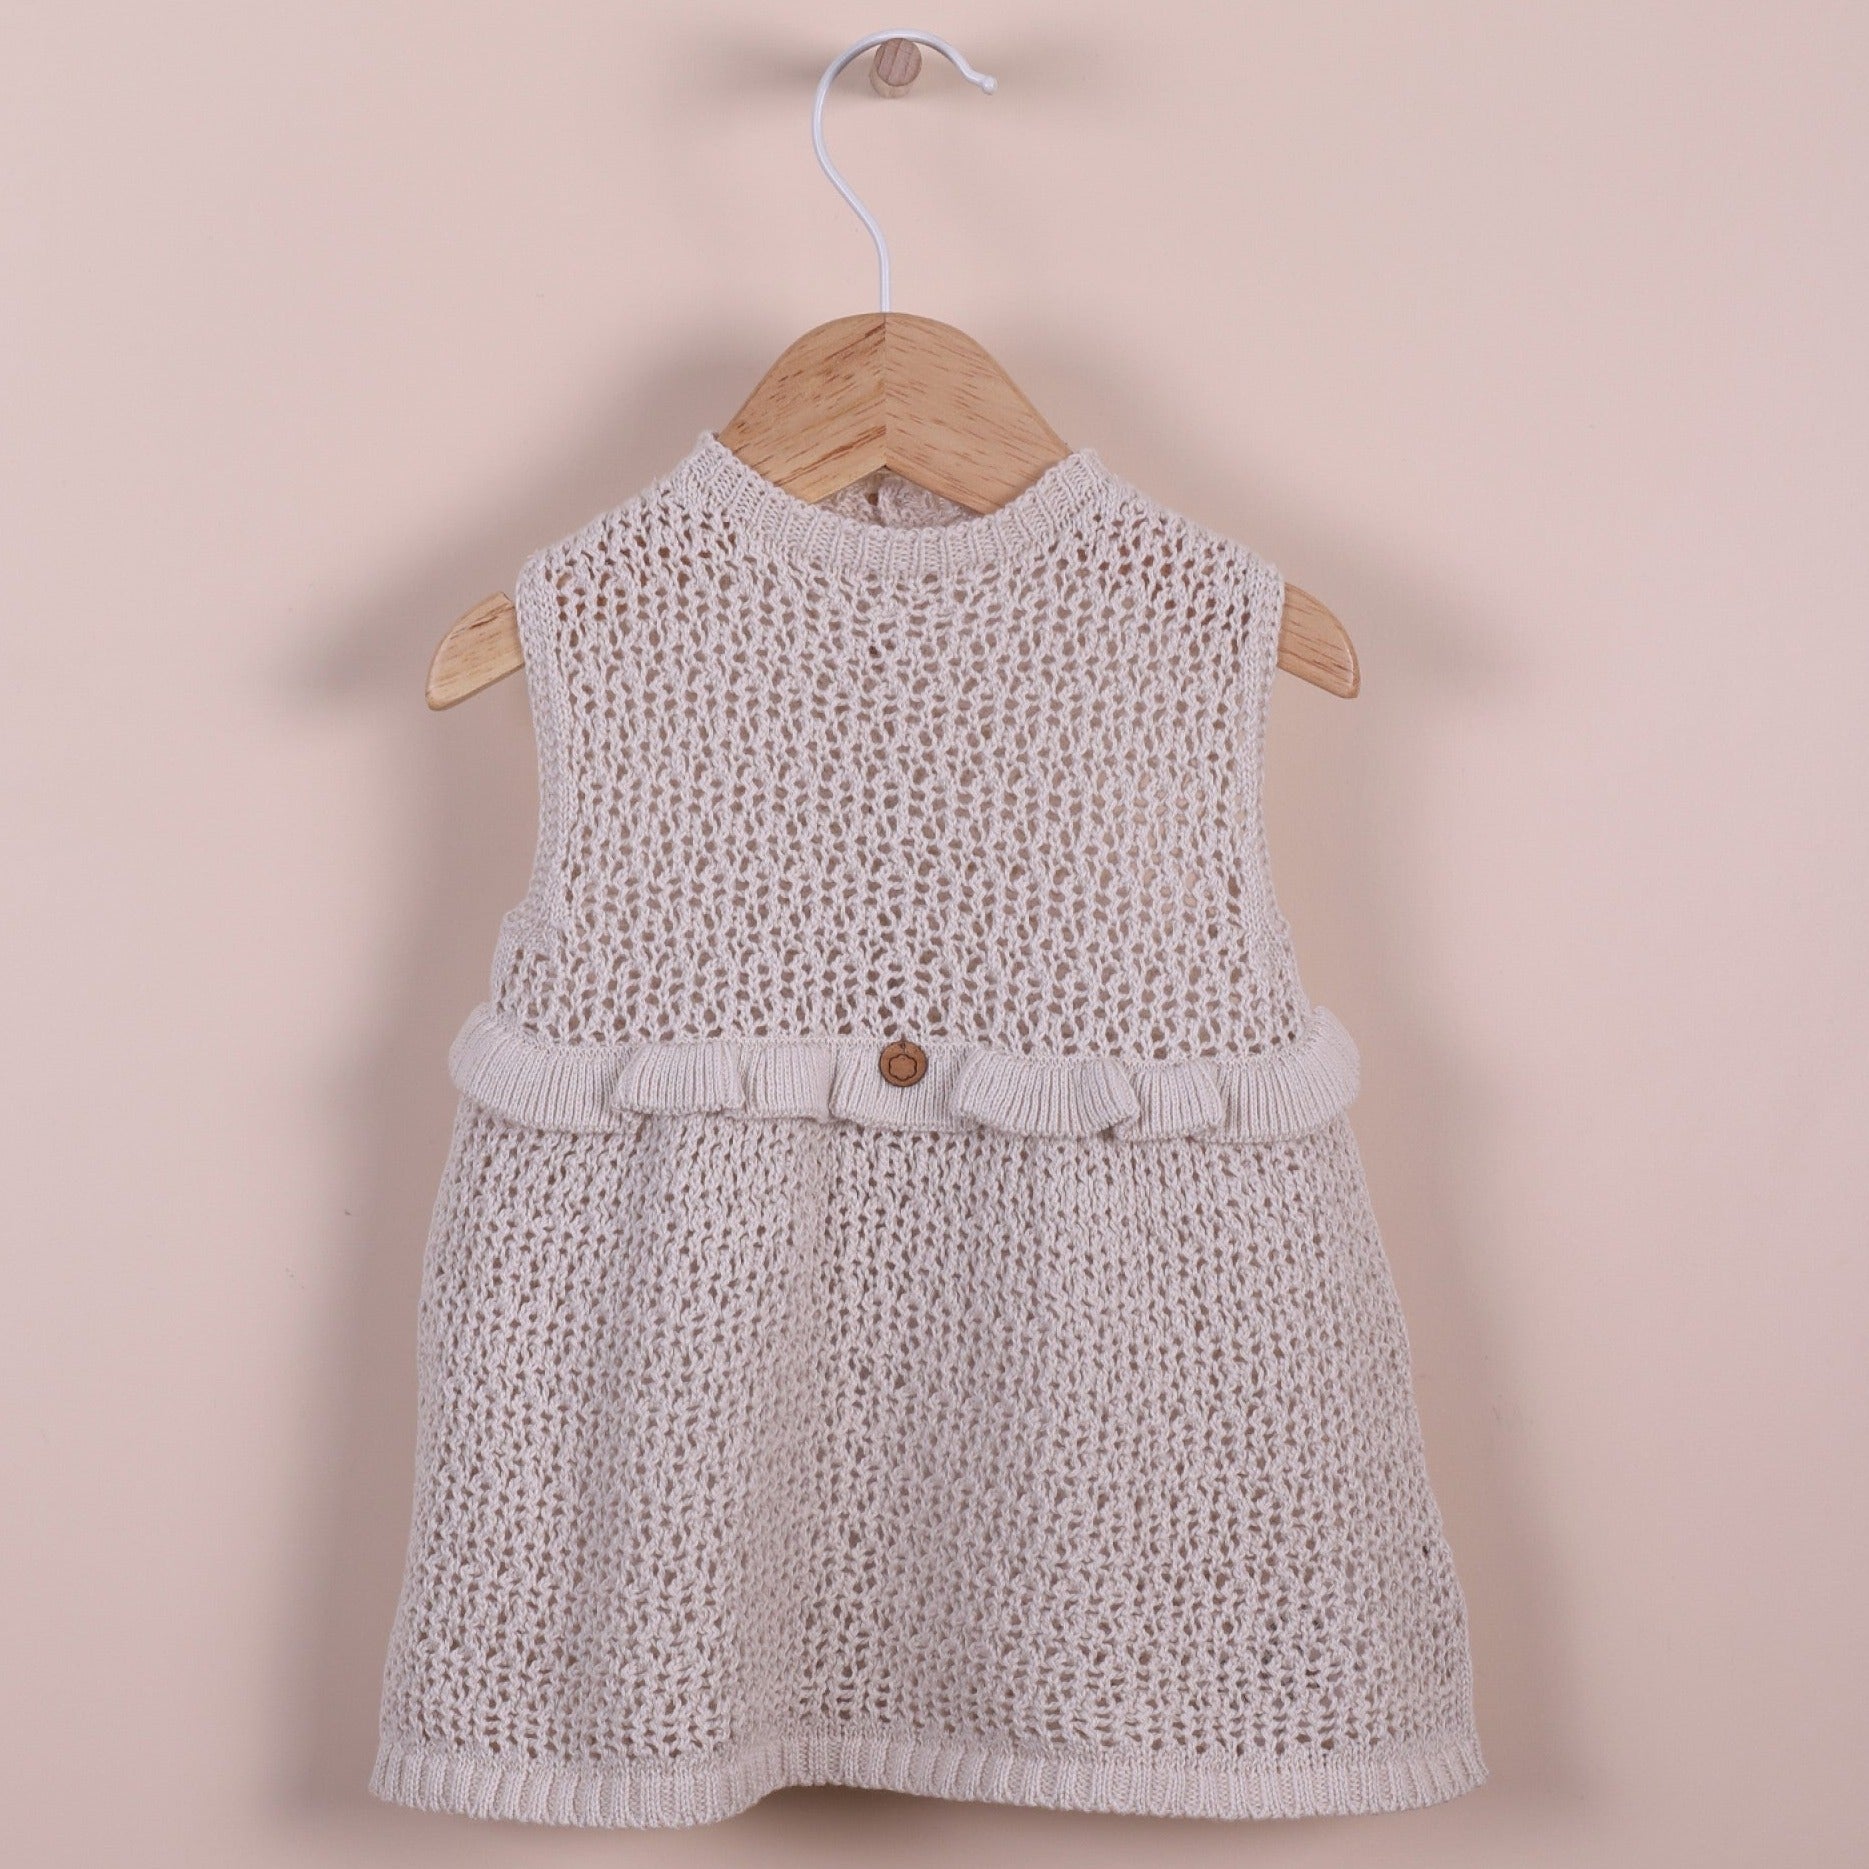 Beige cotton knitted dress - Wedoble